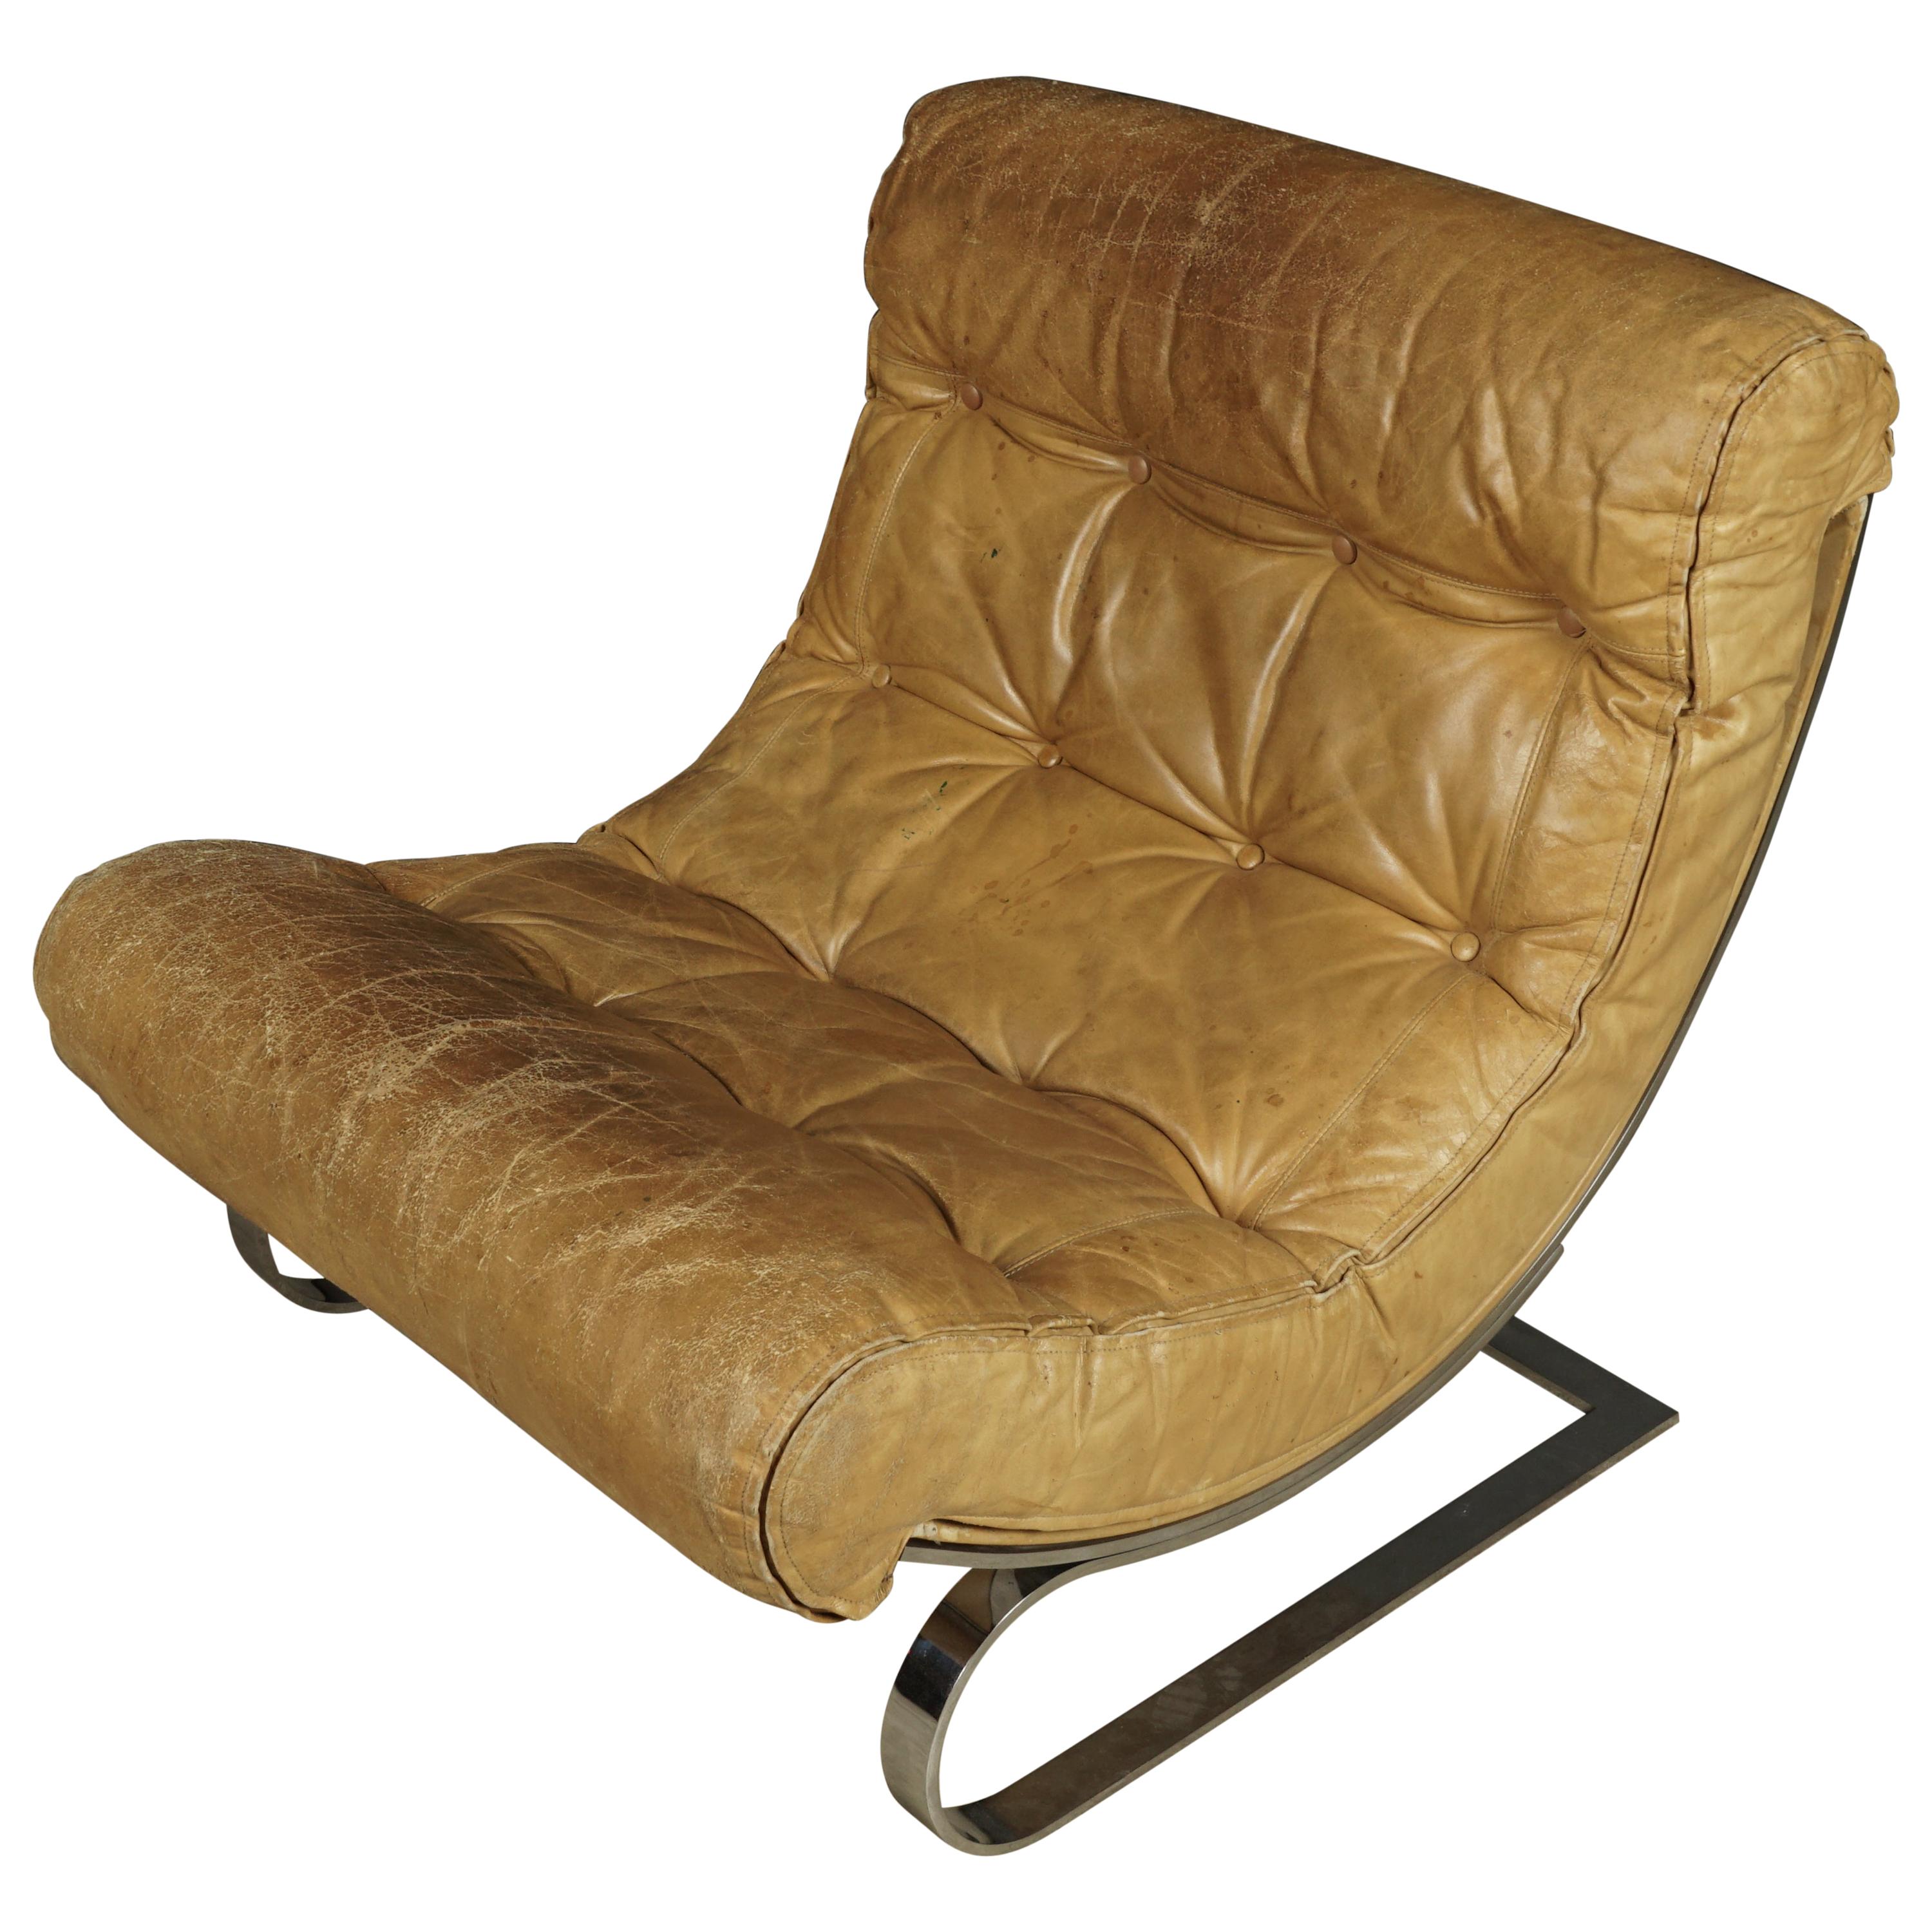 Rare Renato Balestra Lounge Chair, from France, 1970s